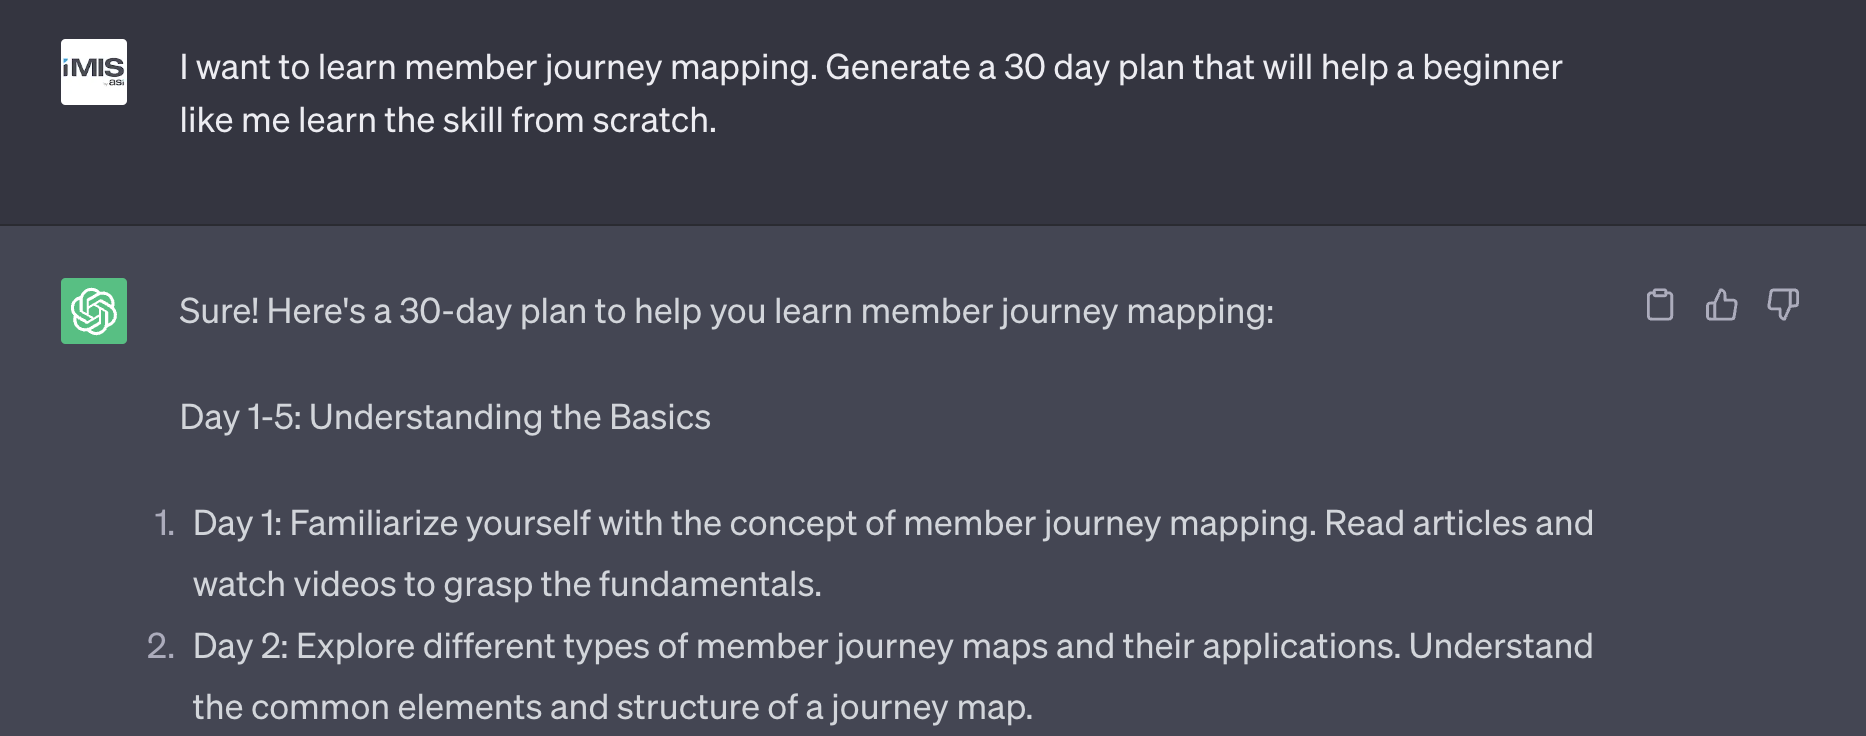 ChatGPT lays out a 30-day plan for learning member journey mapping.